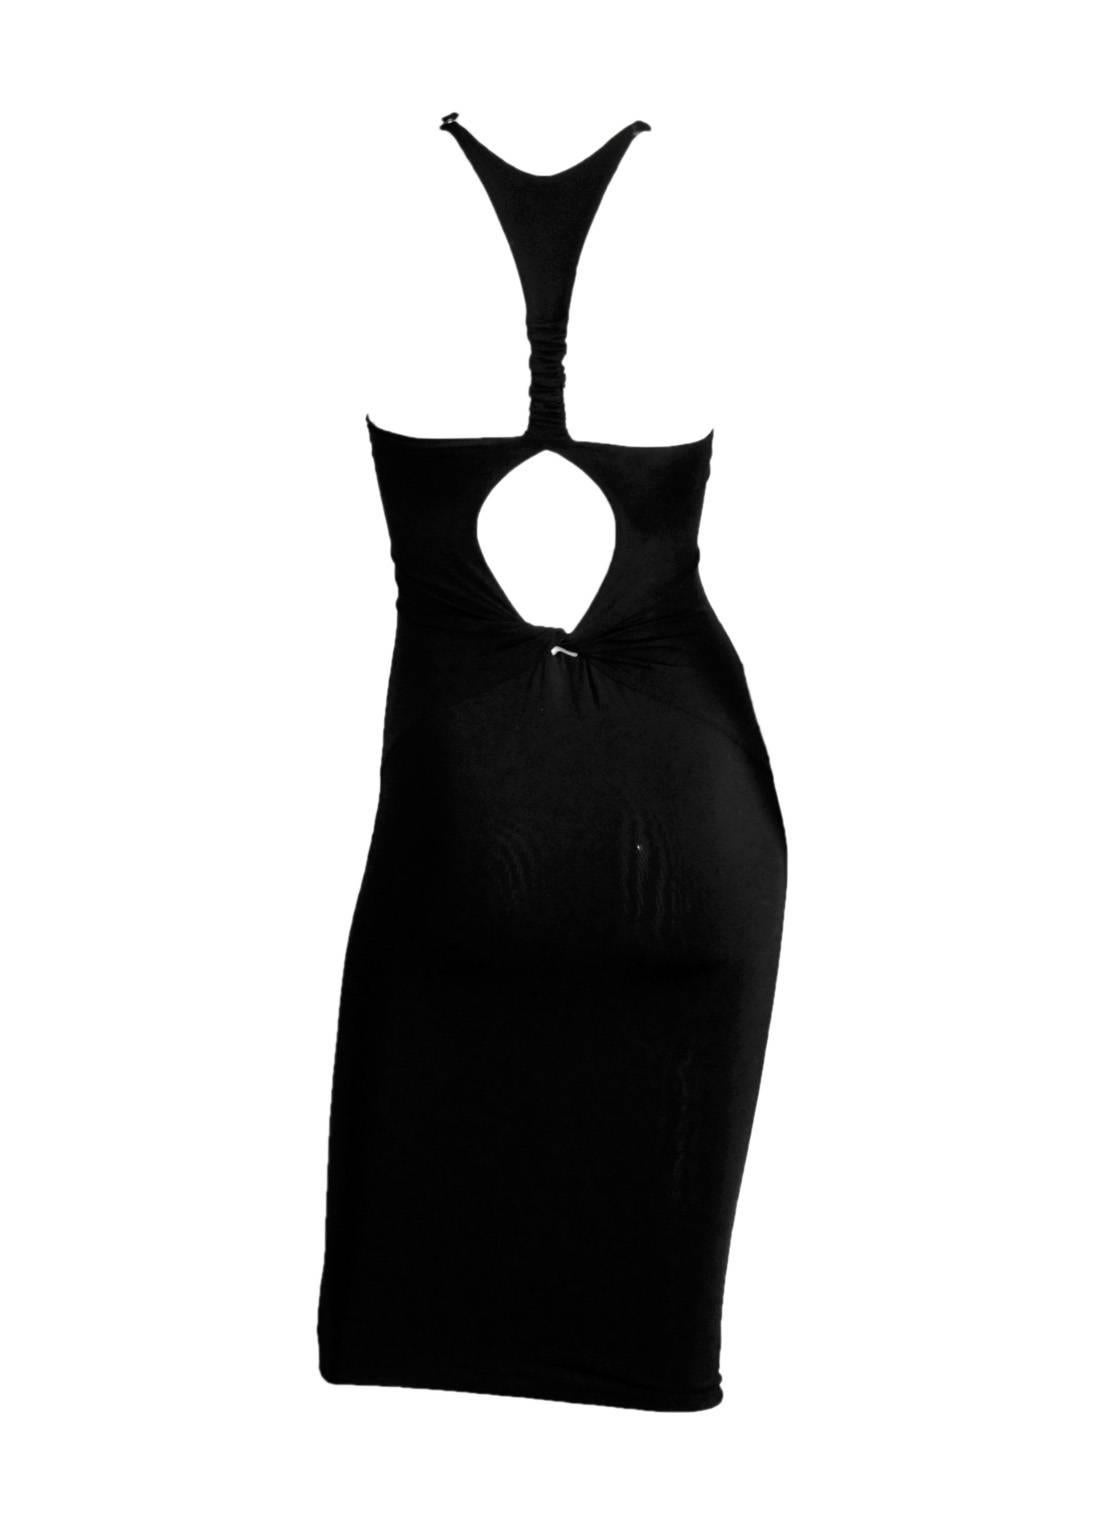 Robin Wright Penn's Heavenly Tom Ford Gucci FW 2004 Collection Dress In Everyone's Perennial Favorite: Black!

Who could ever forget that heavenly white gown Robin Wright Penn wore from Tom Ford's final unforgettable collection for Gucci, back in